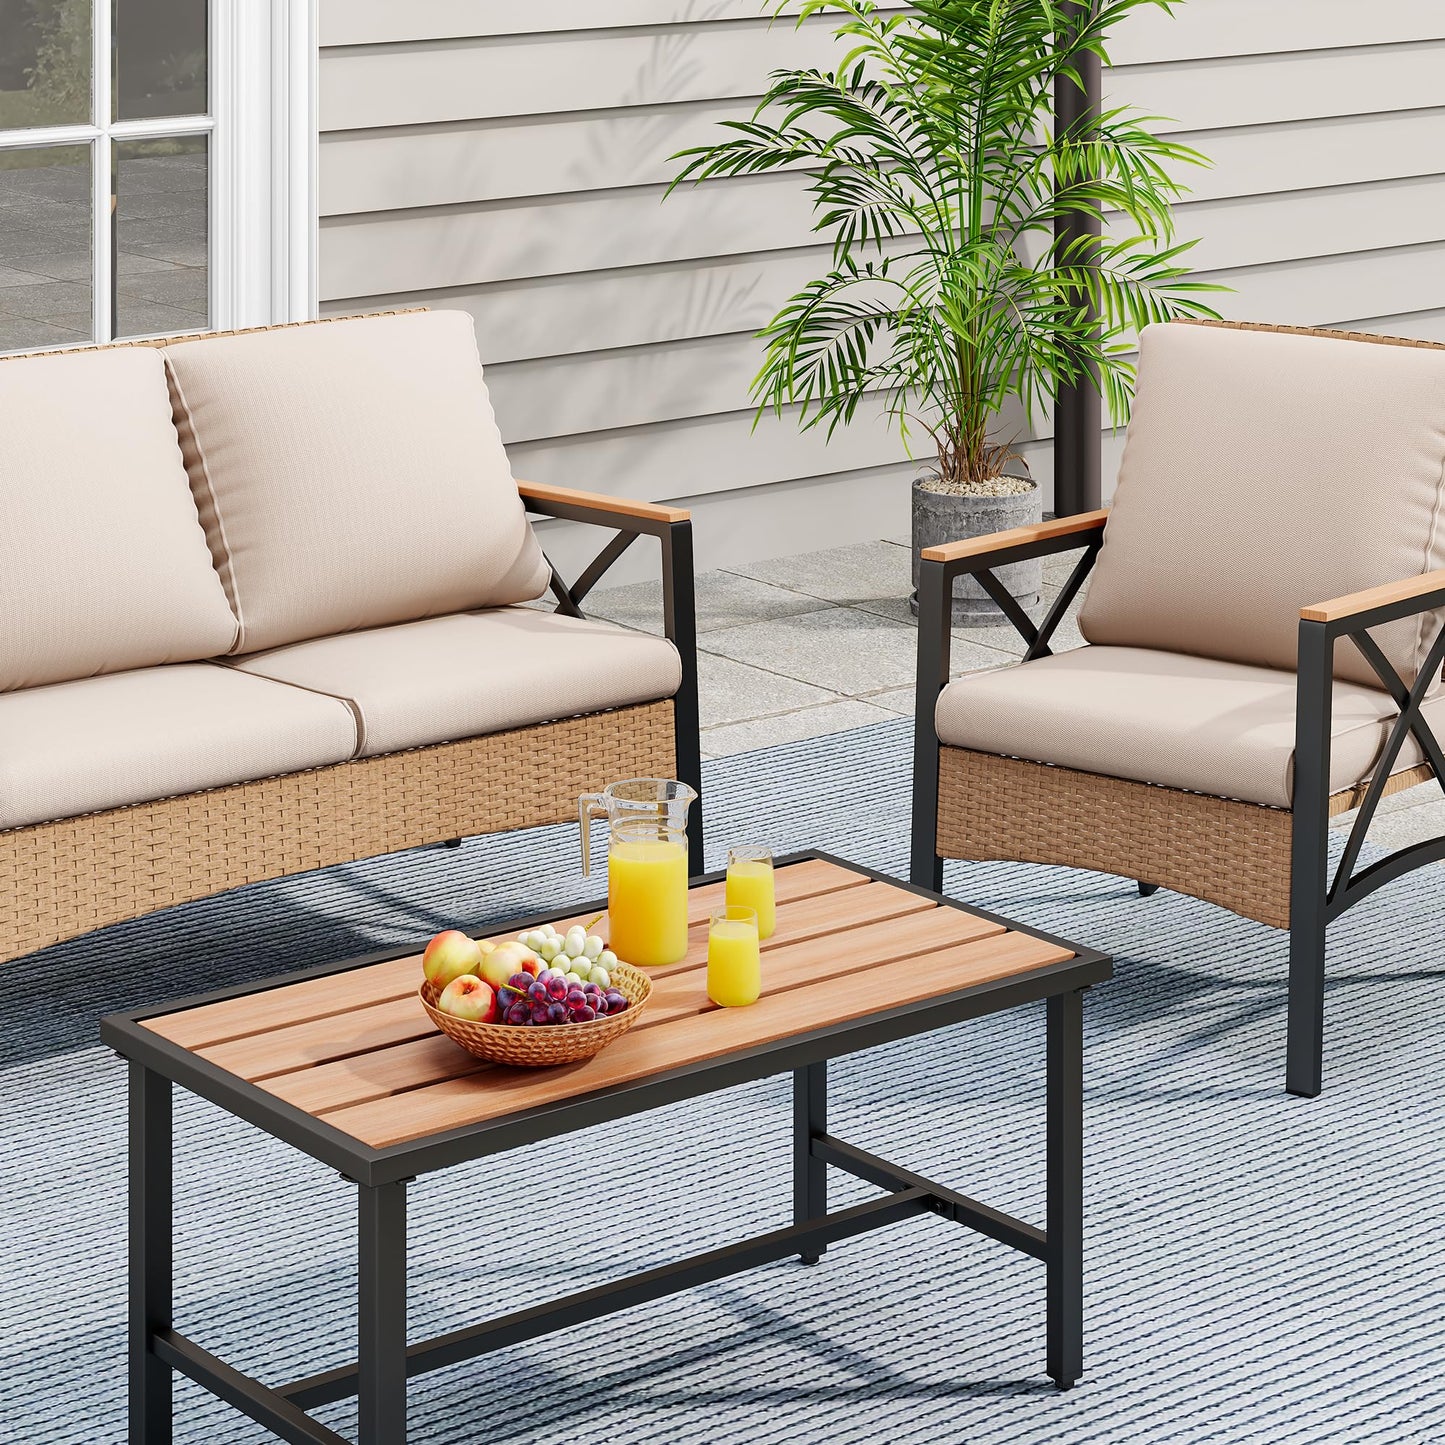 YITAHOME 4-Piece Patio Wicker Furniture Set with Wood Armrest, All Weather Rattan Conversation Furniture Sets for Backyard, Balcony, Deck w/Soft Cushions and Plastic Wood Table (Light Brown+Beige)